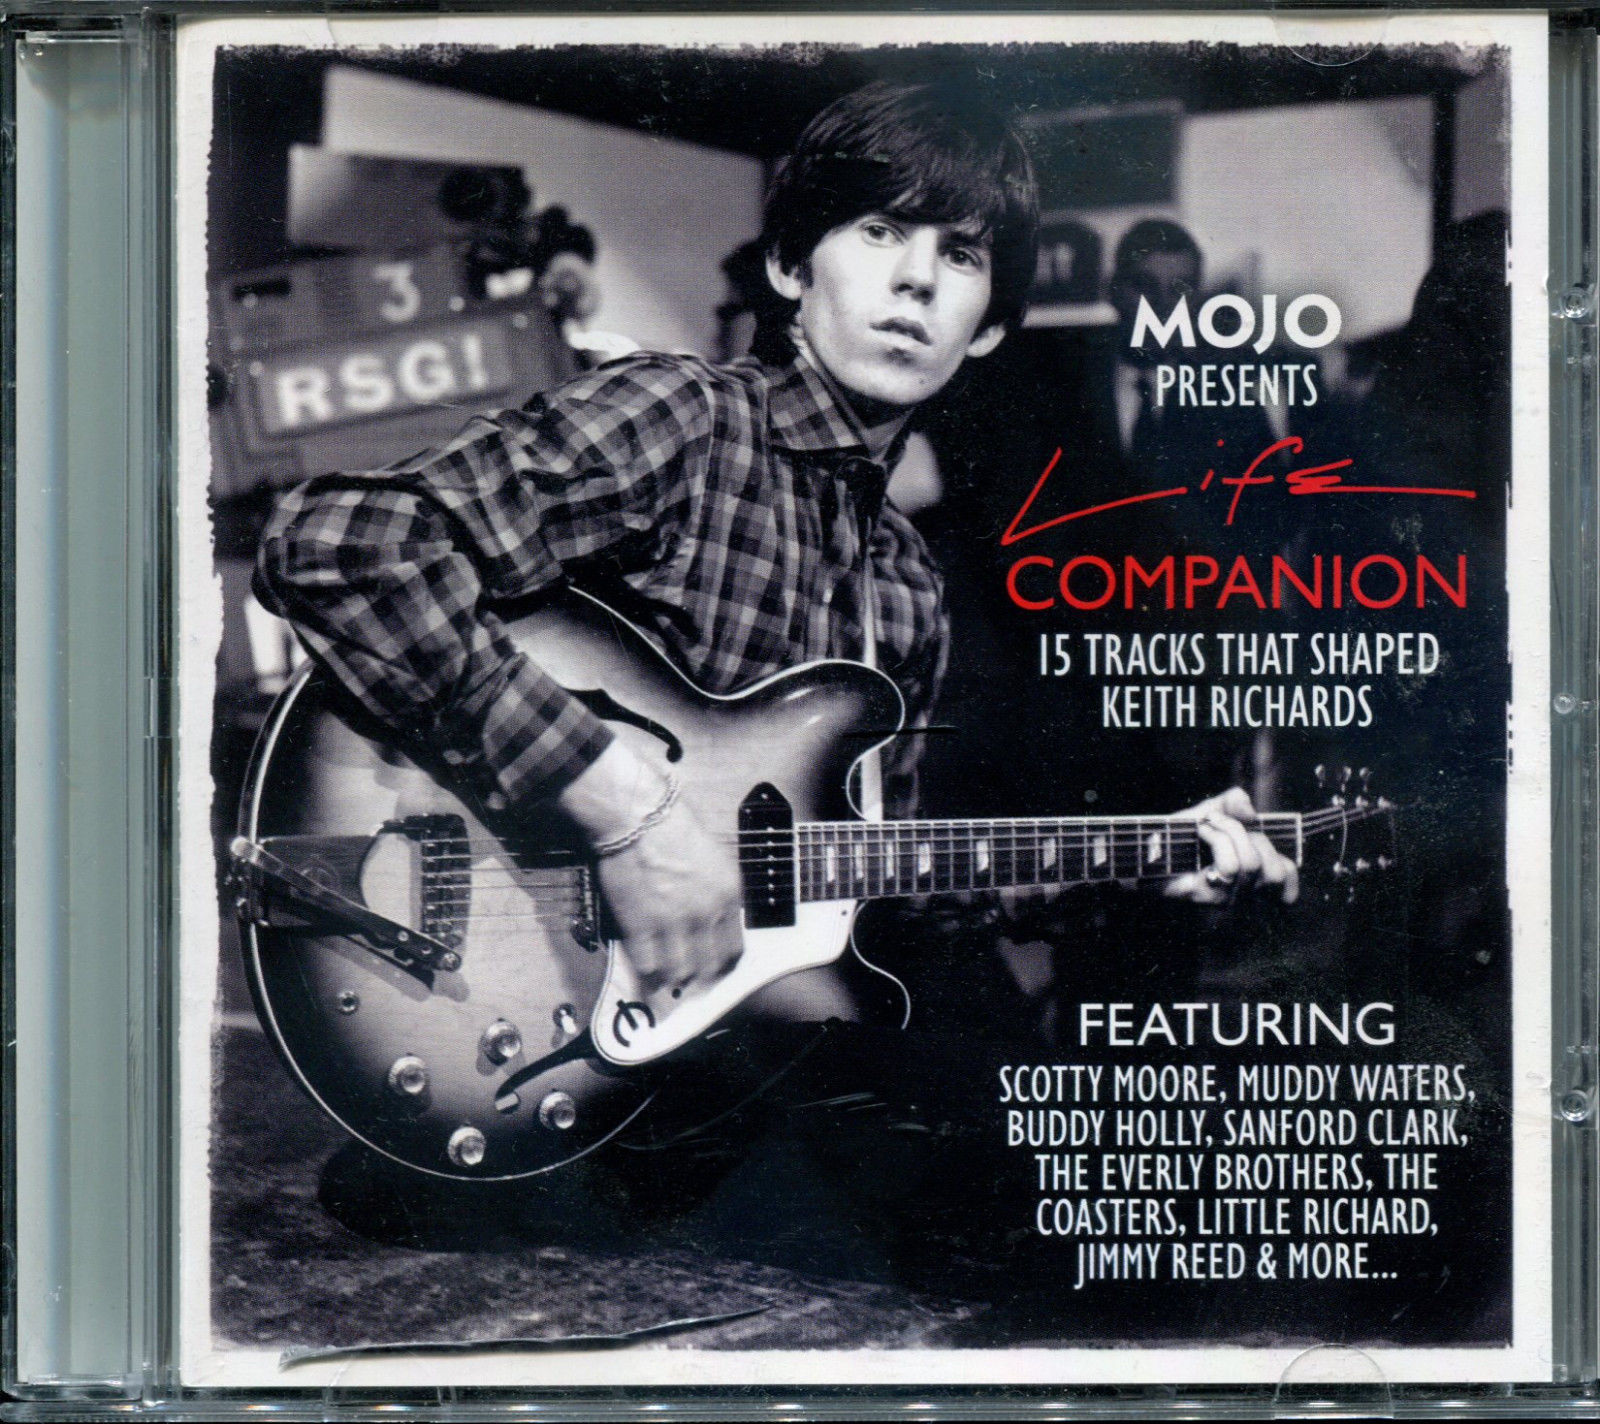 V/A incl. Muddy Waters, Chuck Berry, Little Richard, Bo Diddley, etc : Life Companion, 15 tracks that shaped Keith Richards, CD, UK, 2015 - £ 6.02